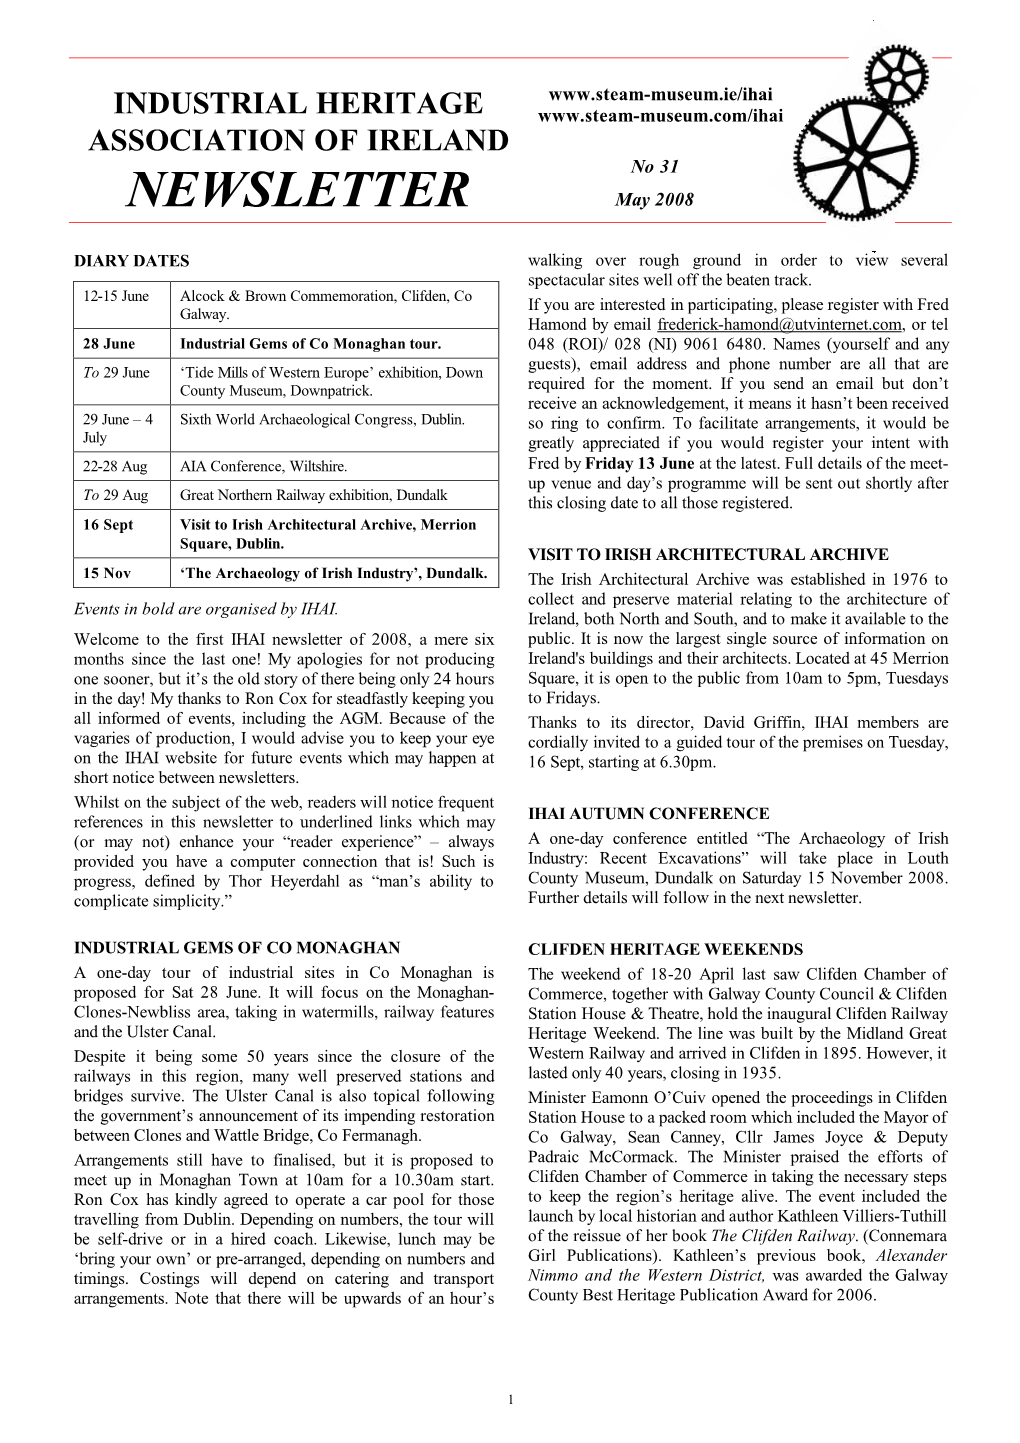 NEWSLETTER May 2008